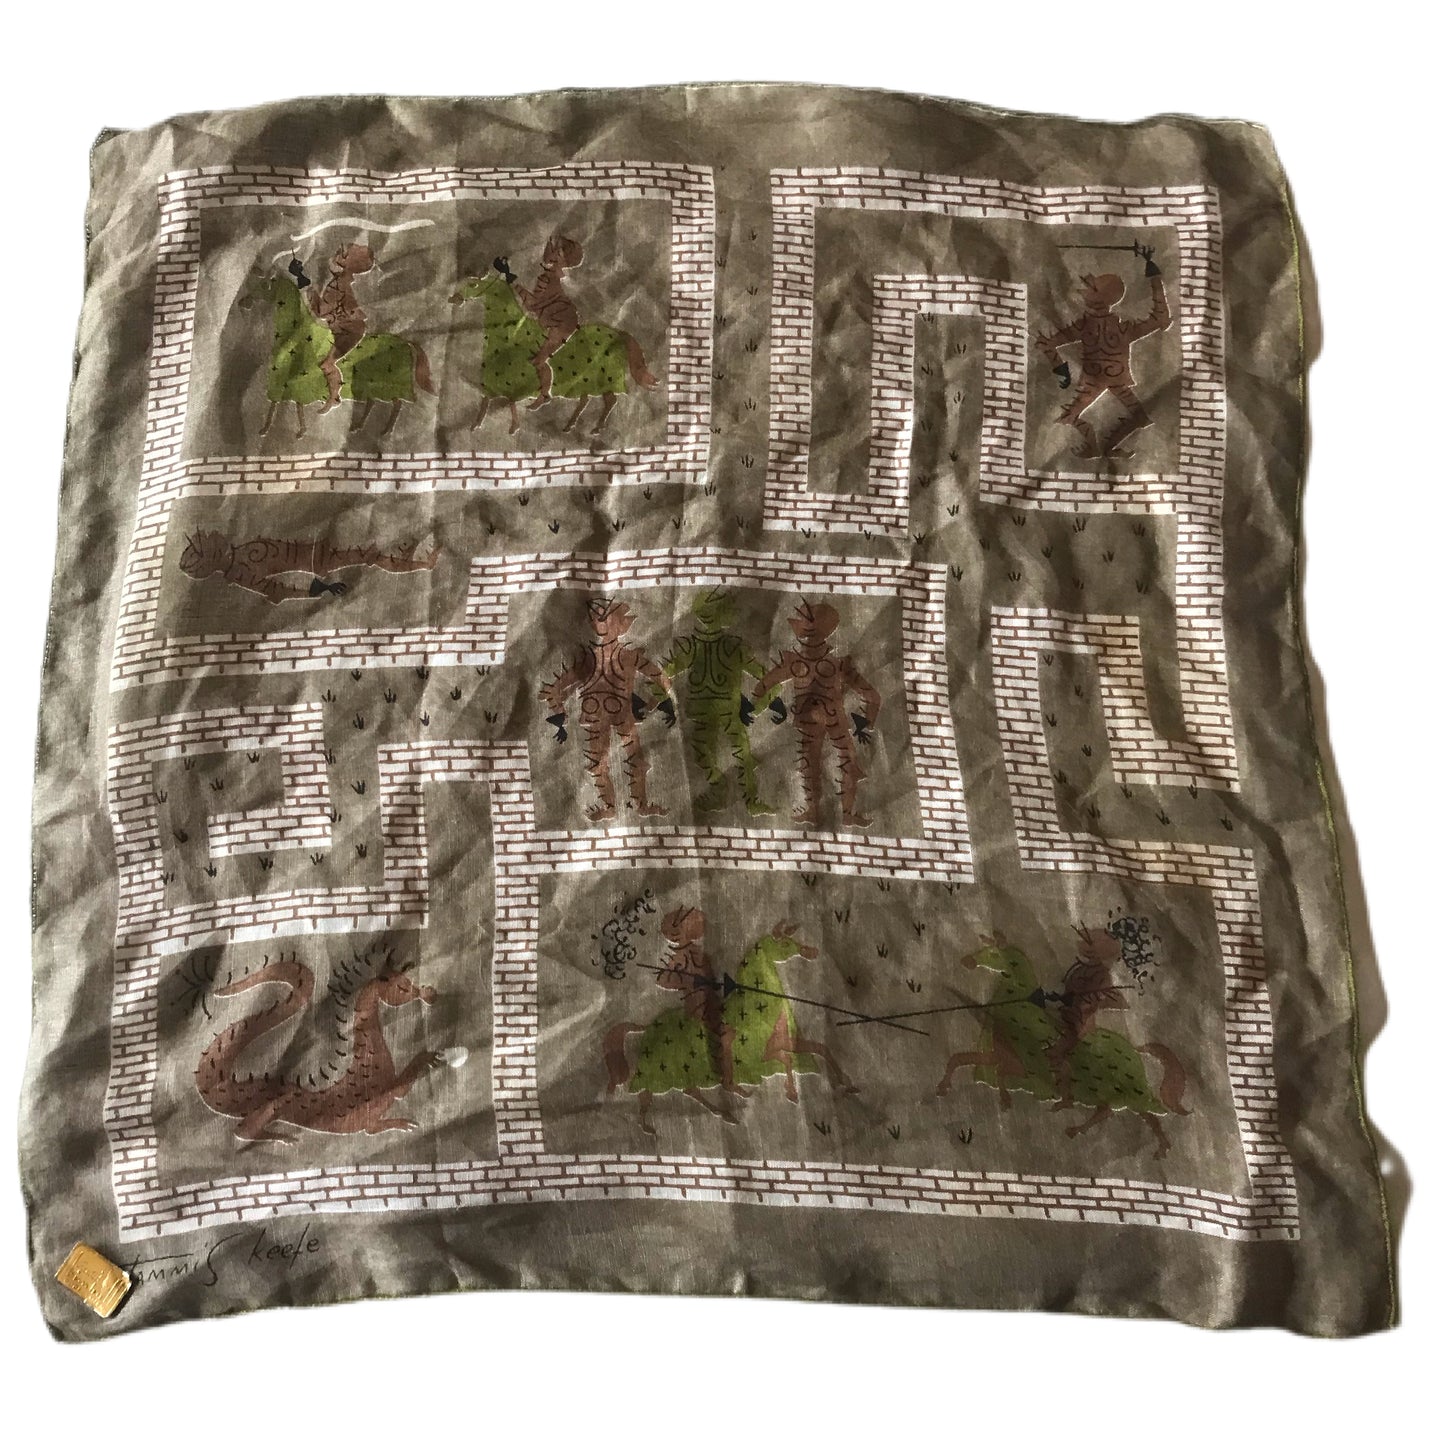 Medieval Knights and Dragons D&D Themed Tammis Keefe Handkerchief circa 1960s